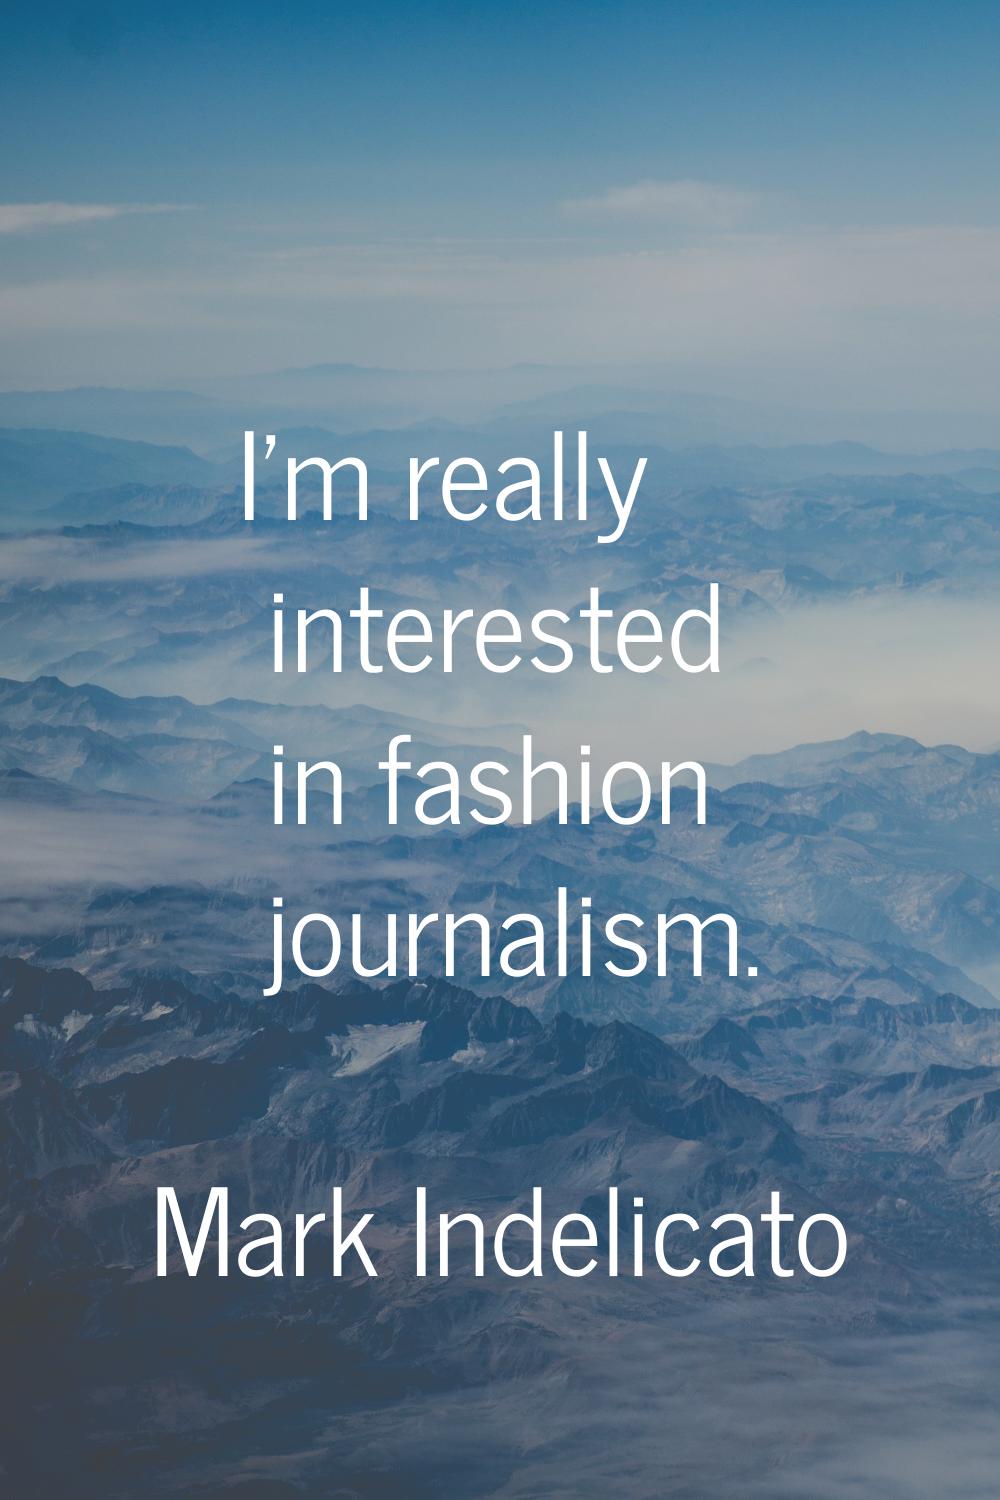 I'm really interested in fashion journalism.